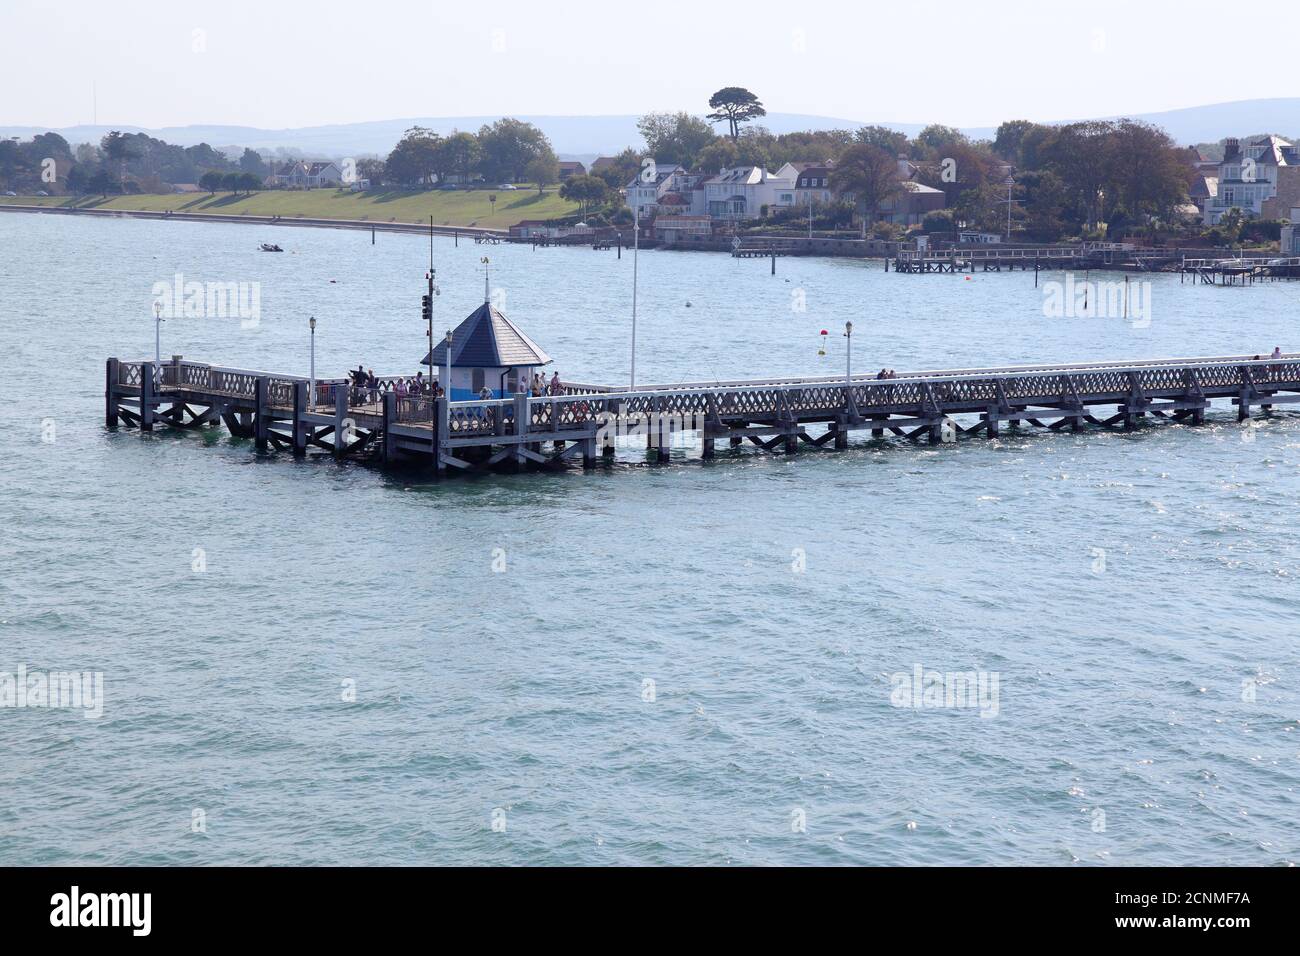 Grade II listed Yarmouth Pier, Isle of Wight. Wooden pier made of greenheart wood. Stock Photo